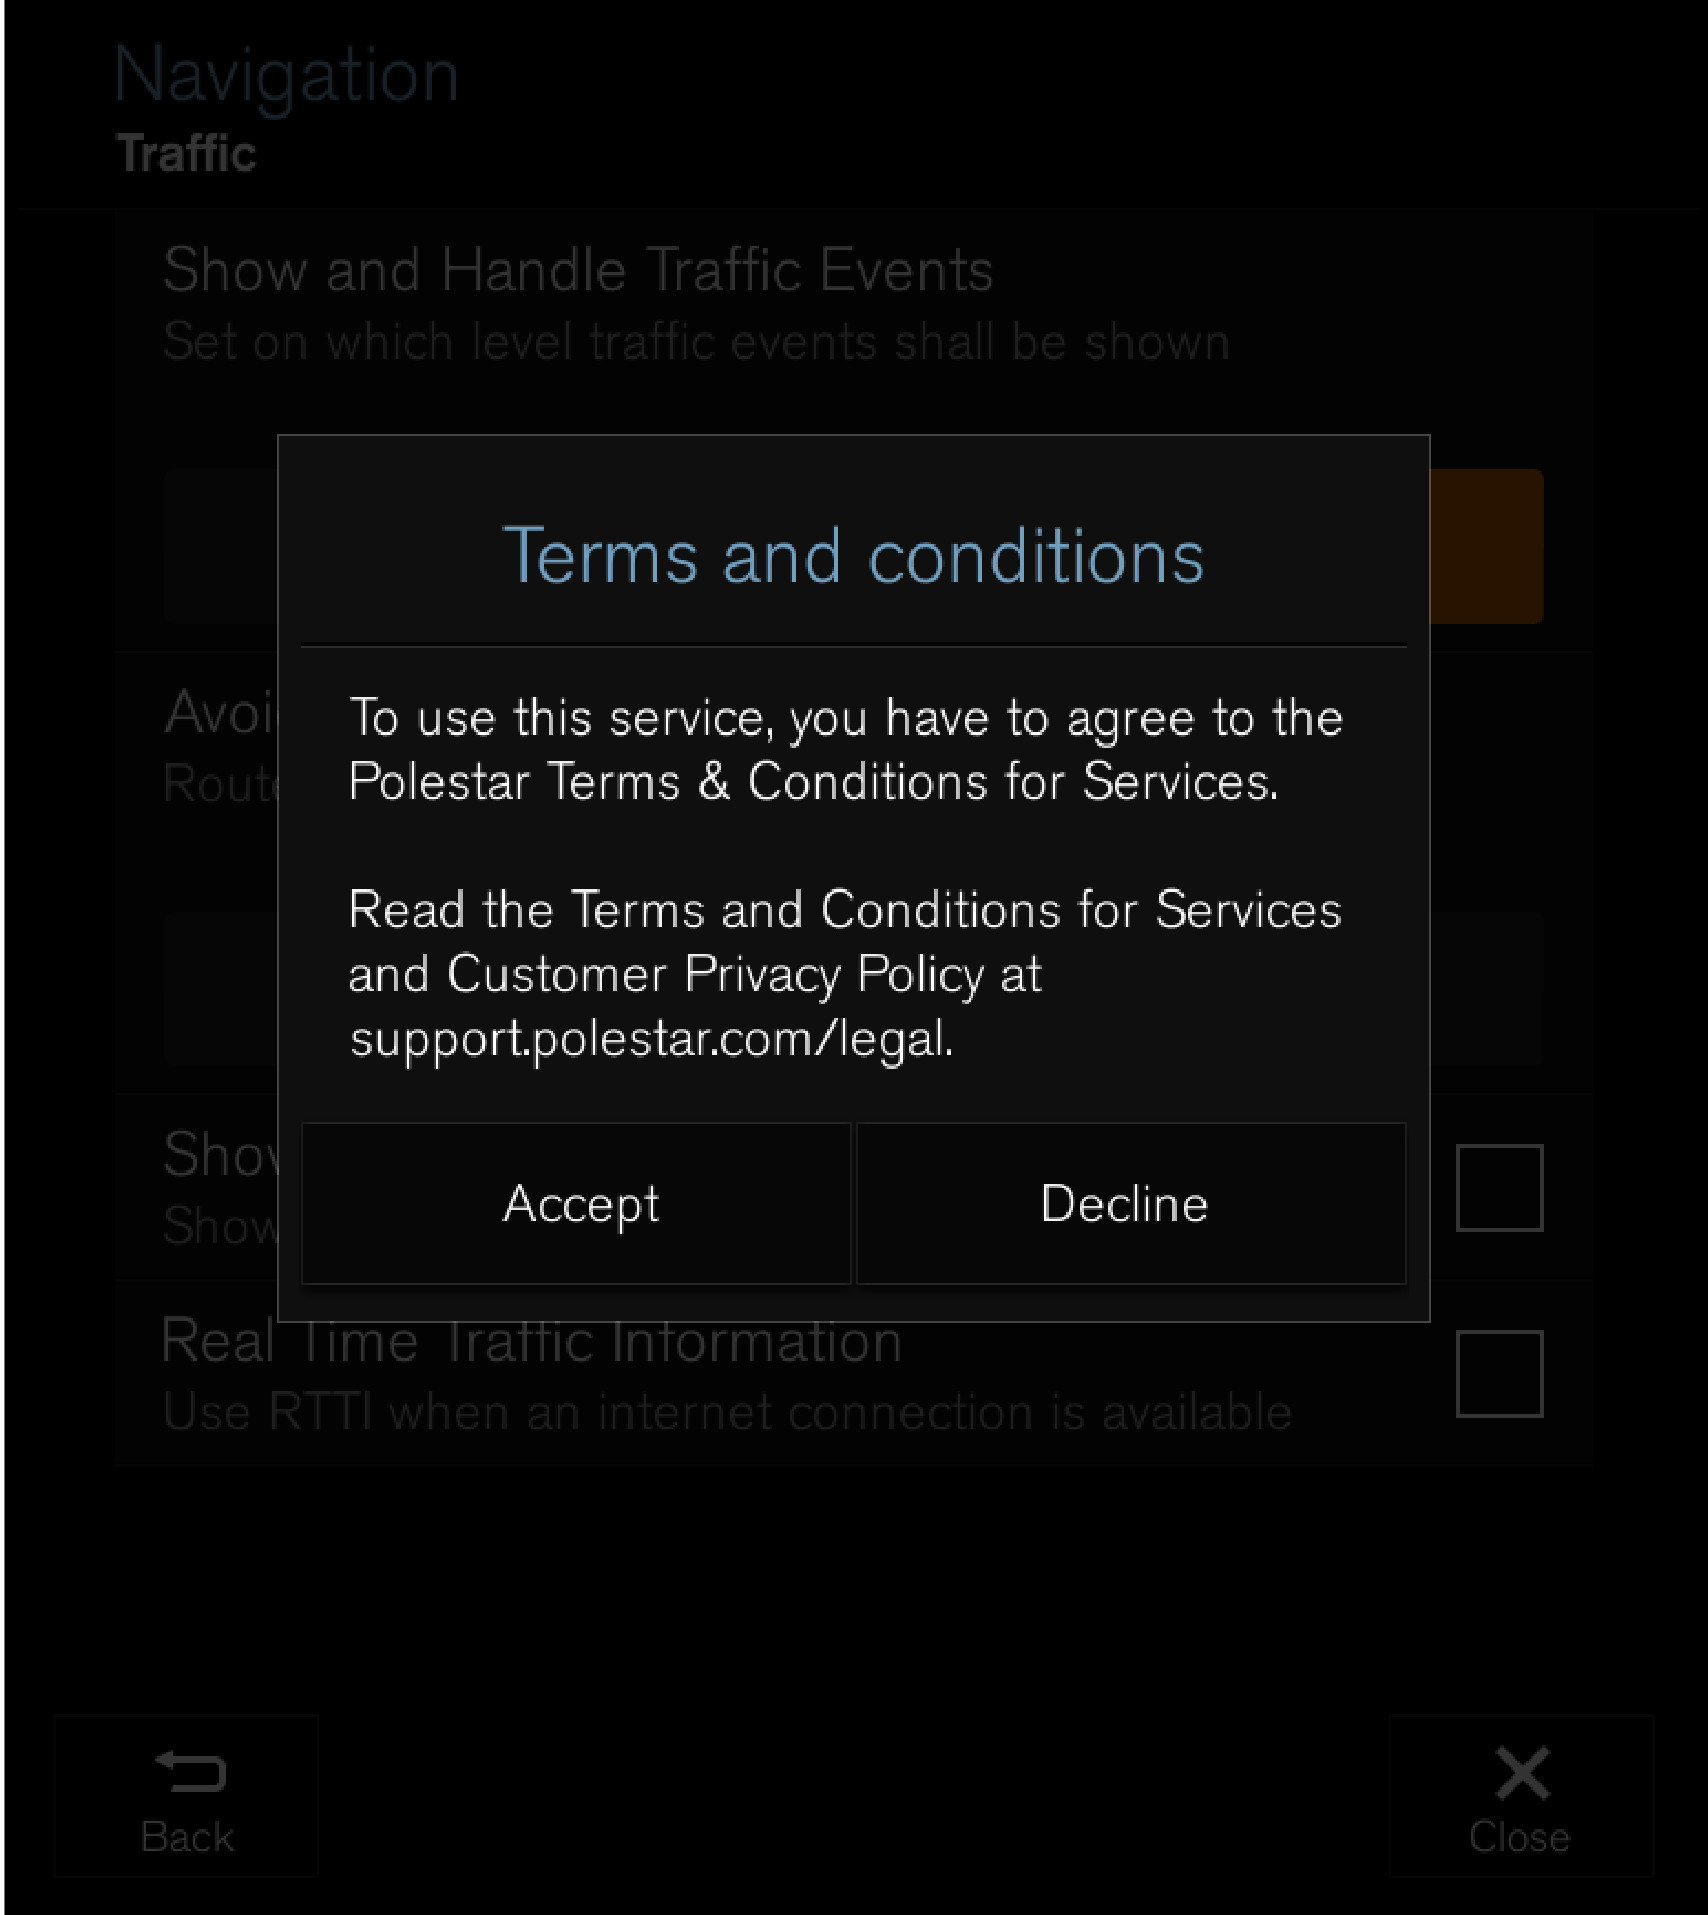 PS-1926-Terms and conditions screen